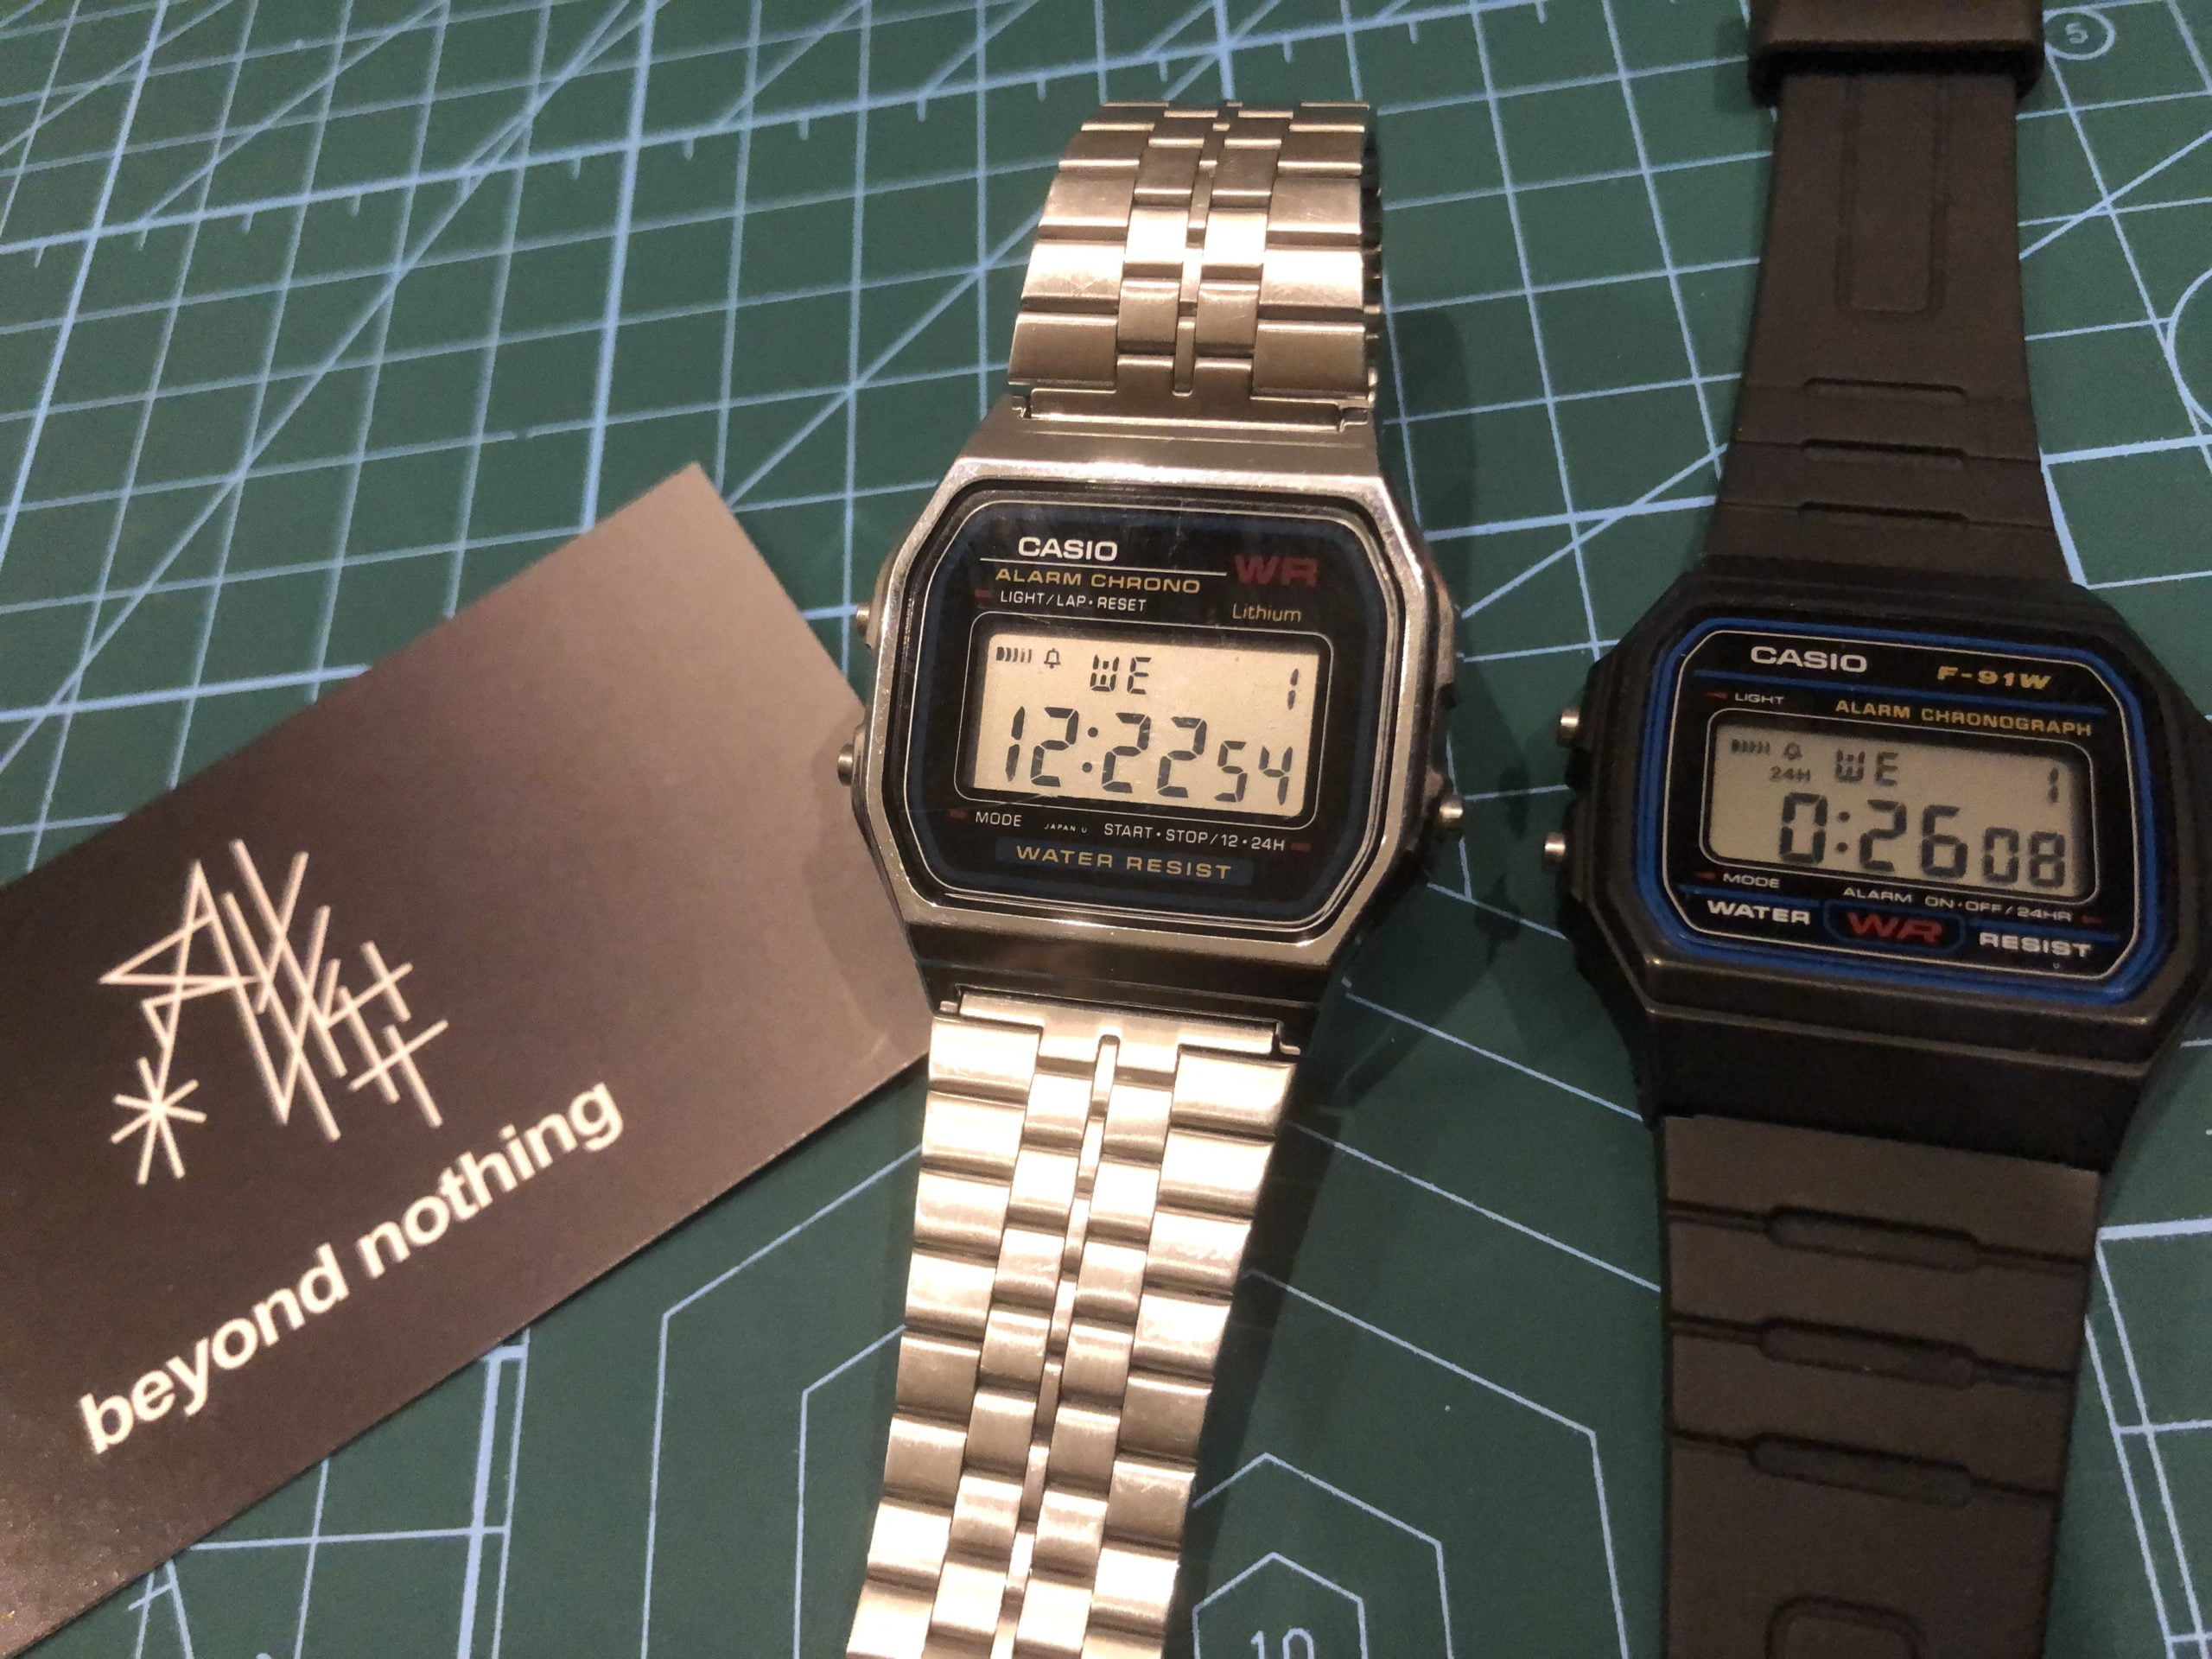 why are casio A159w vs F91w watches so popular